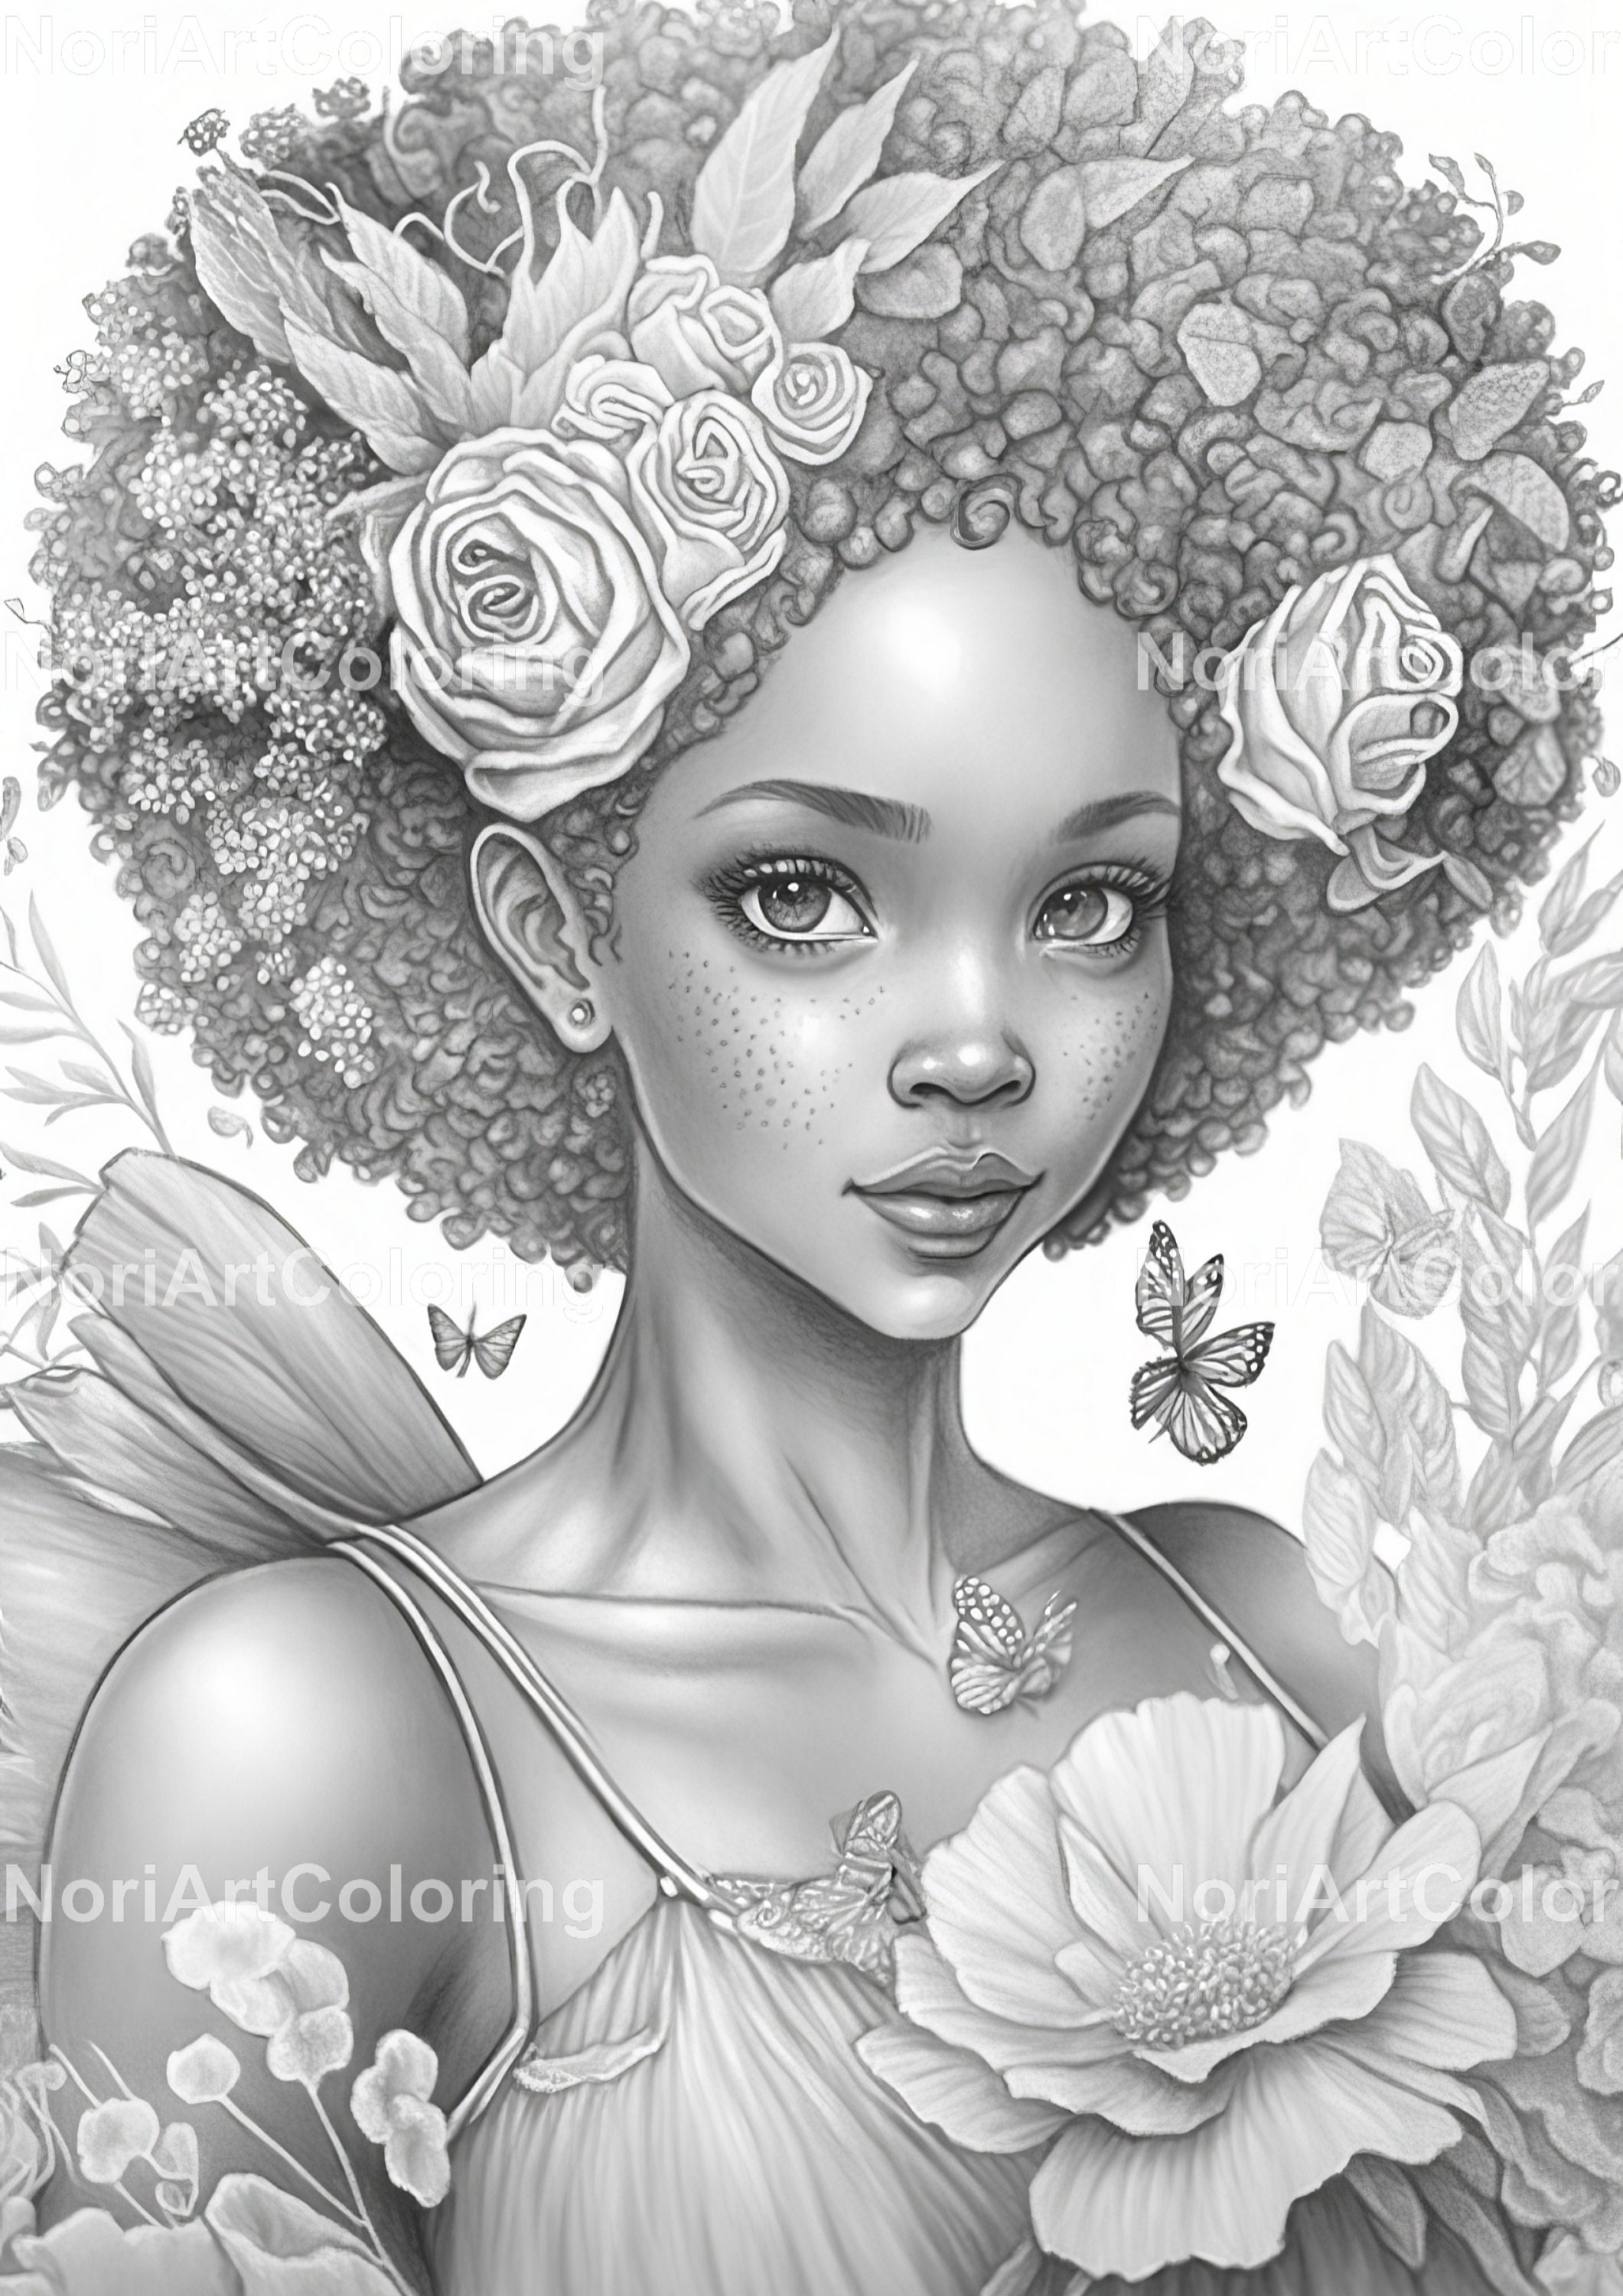 Black Women Hairstyles Coloring Book: Attractive African American Women  Portraits Coloring Book For adults ,Beautiful Hairstyles And Jewelry  Coloring Pages for Adults Relaxation . - Aourir, Jassmine: 9798742736066 -  AbeBooks